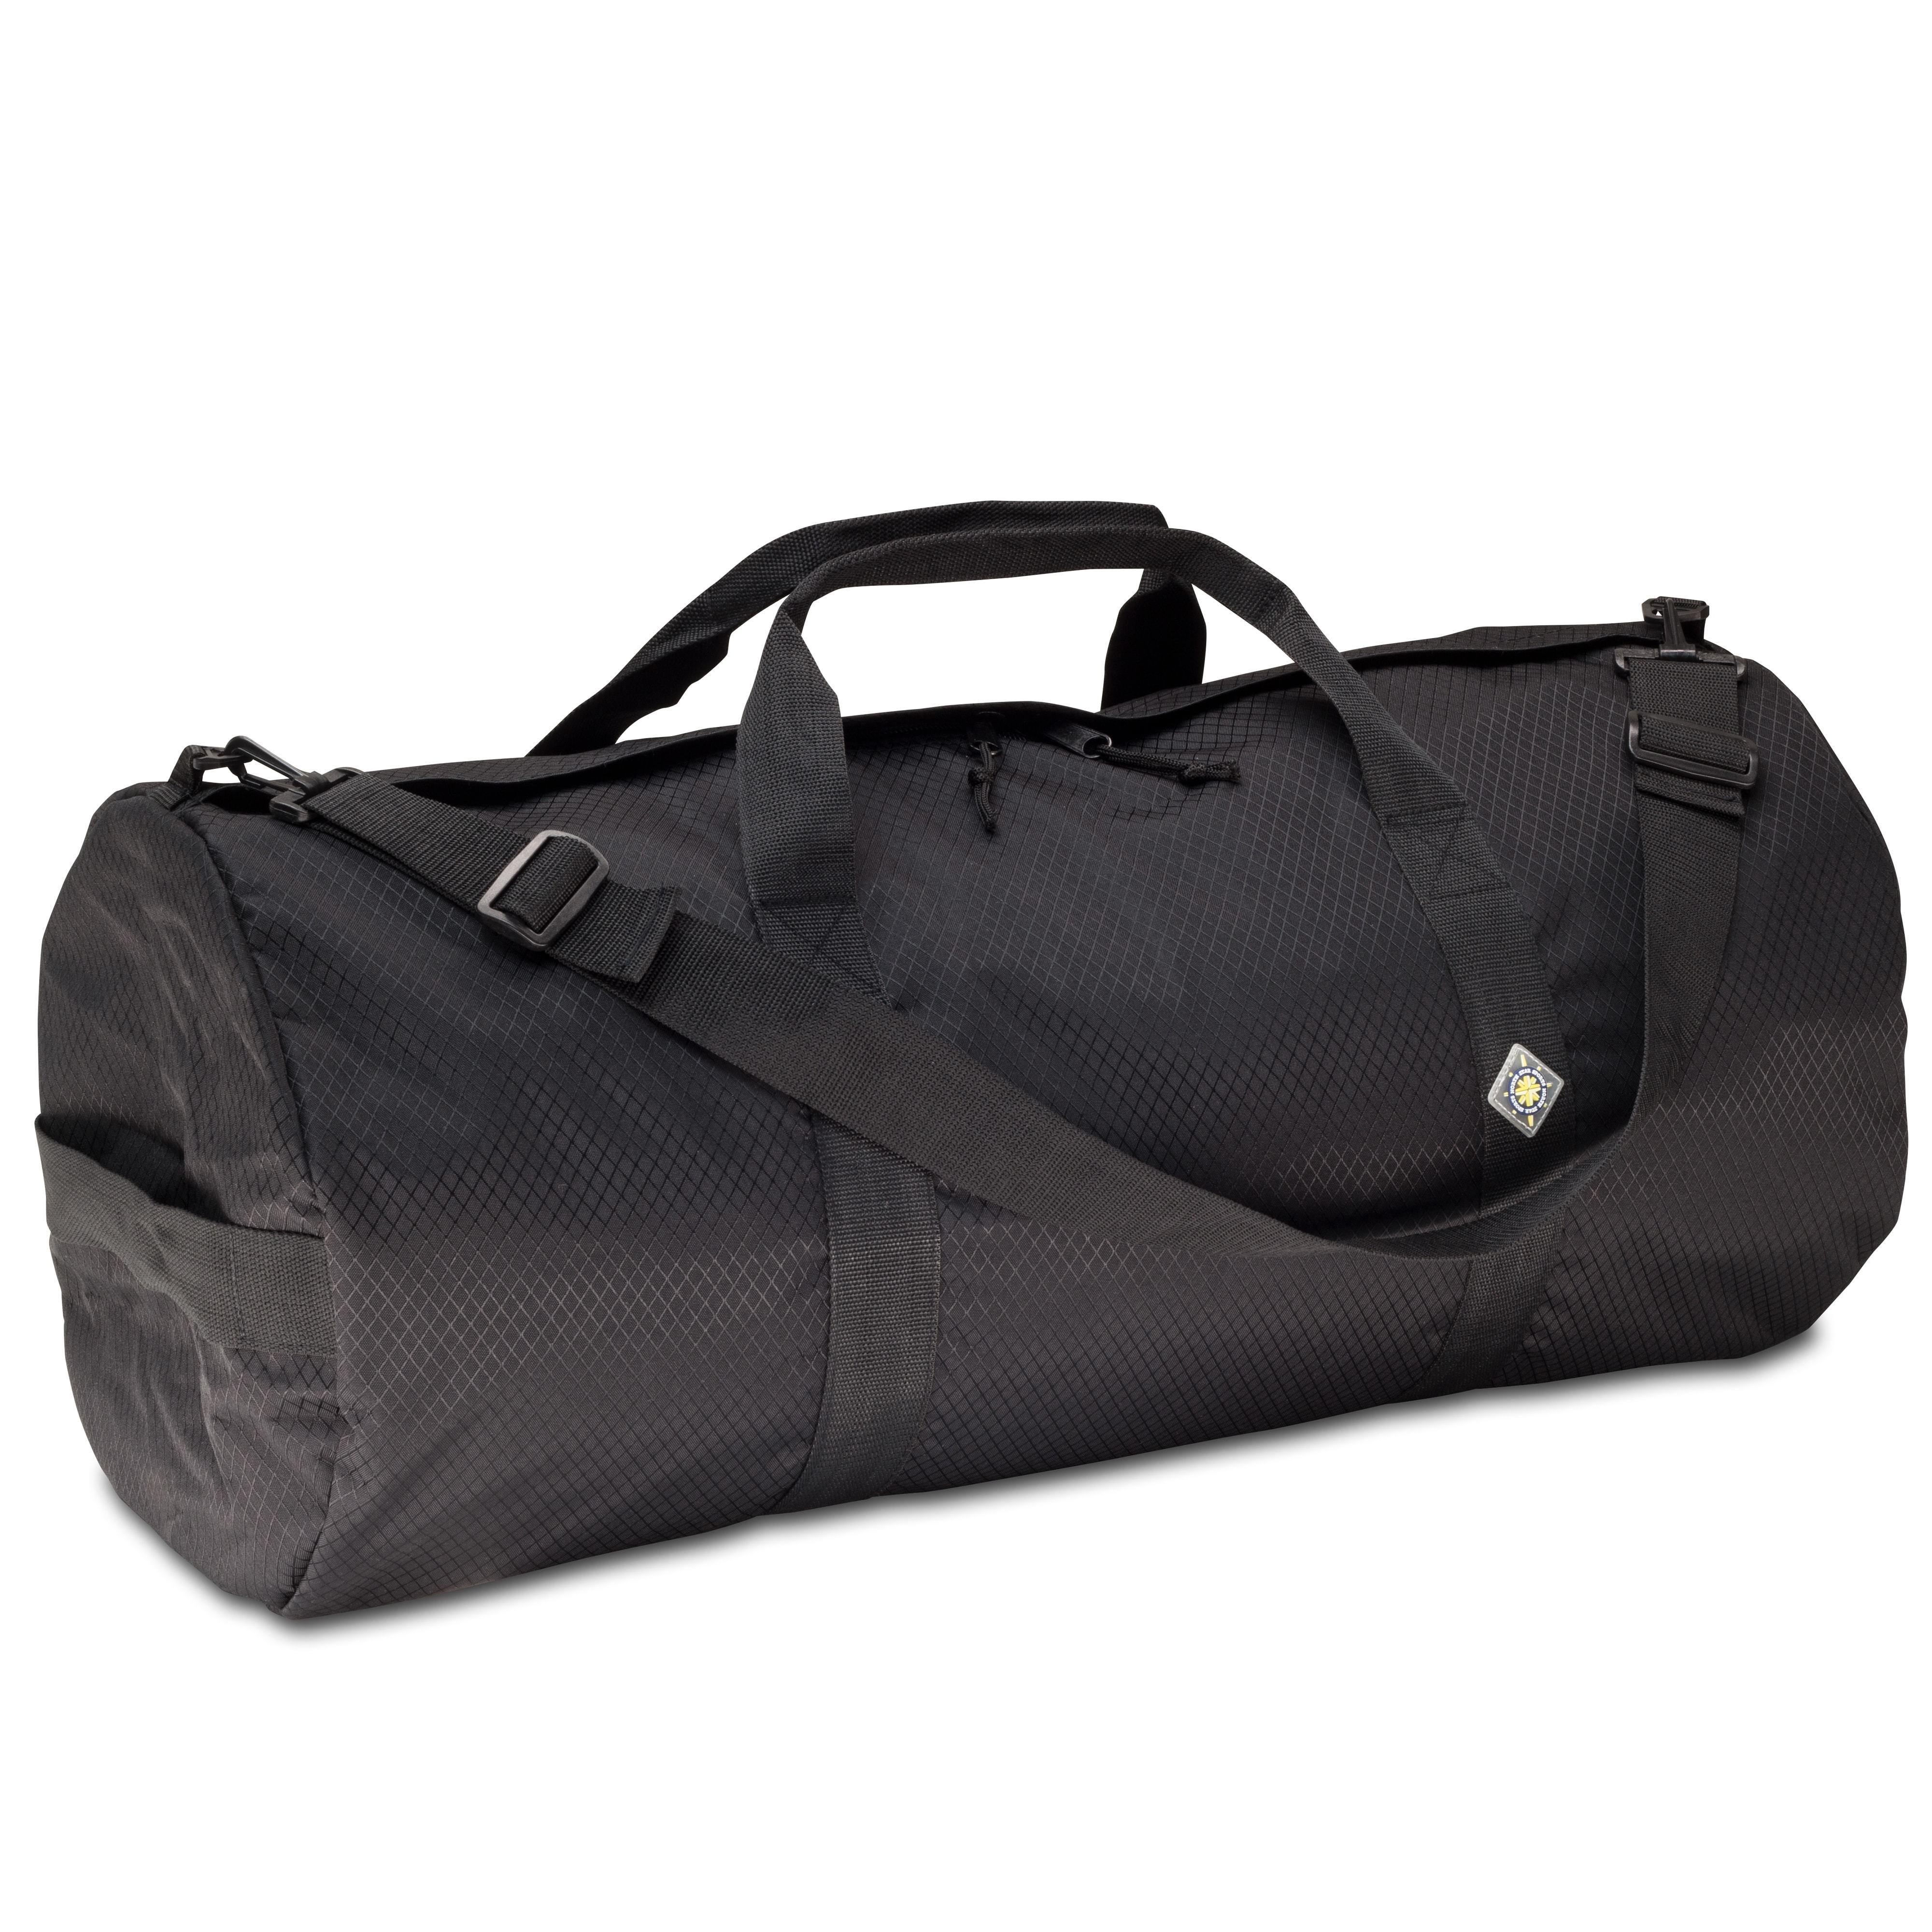 Studio photo the Midnight Black SD1430DLX Standard Duffle by Northstar Bags. 75 liter duffel with diamond ripstop fabric, thick webbing straps, and a large format metal zipper. Guaranteed for life.